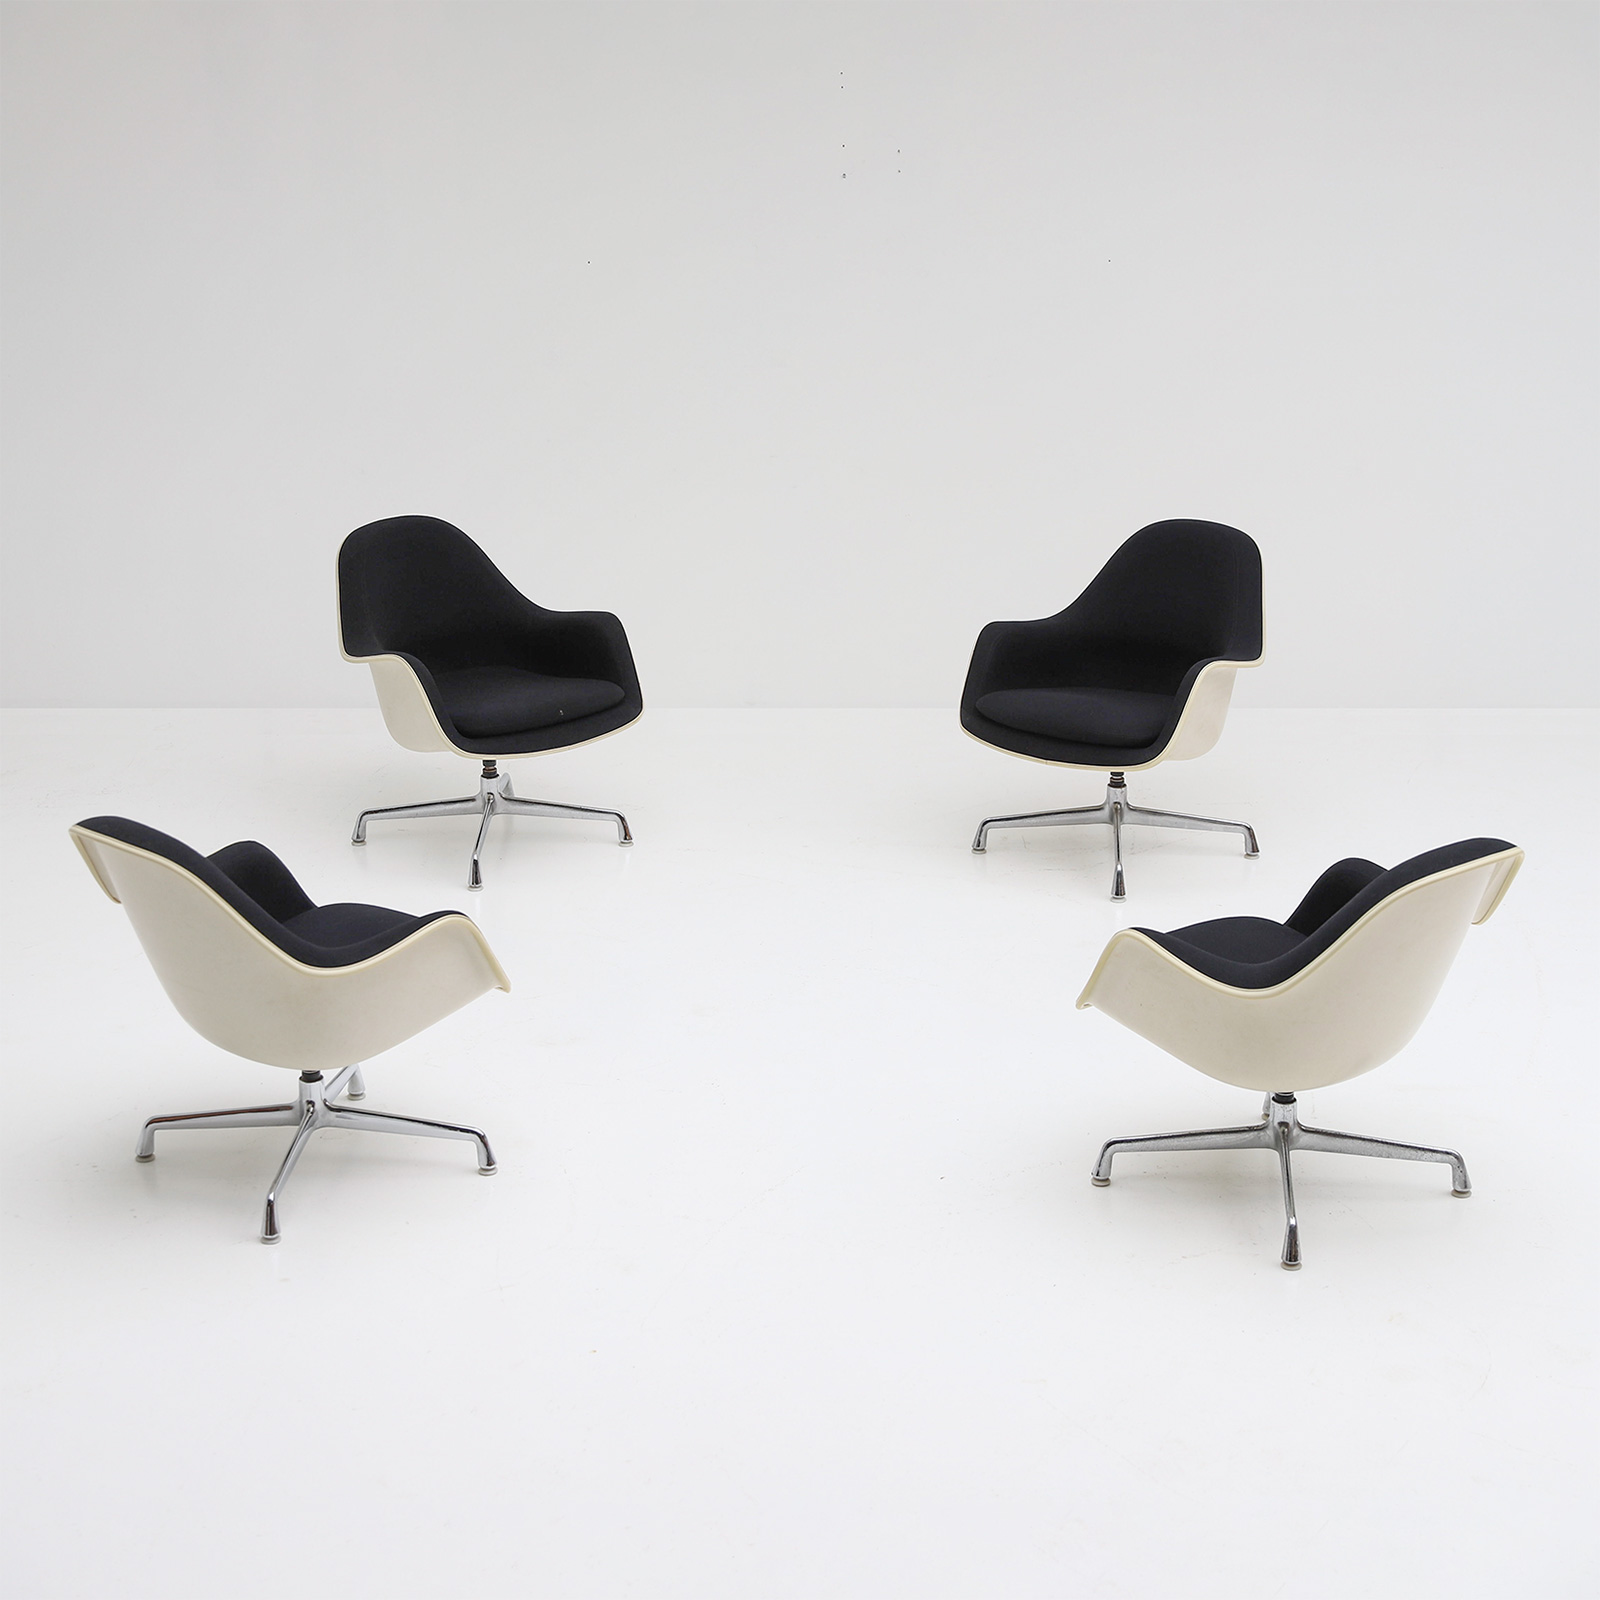 Charles and Ray Eames set of EC175-8 Chairs 